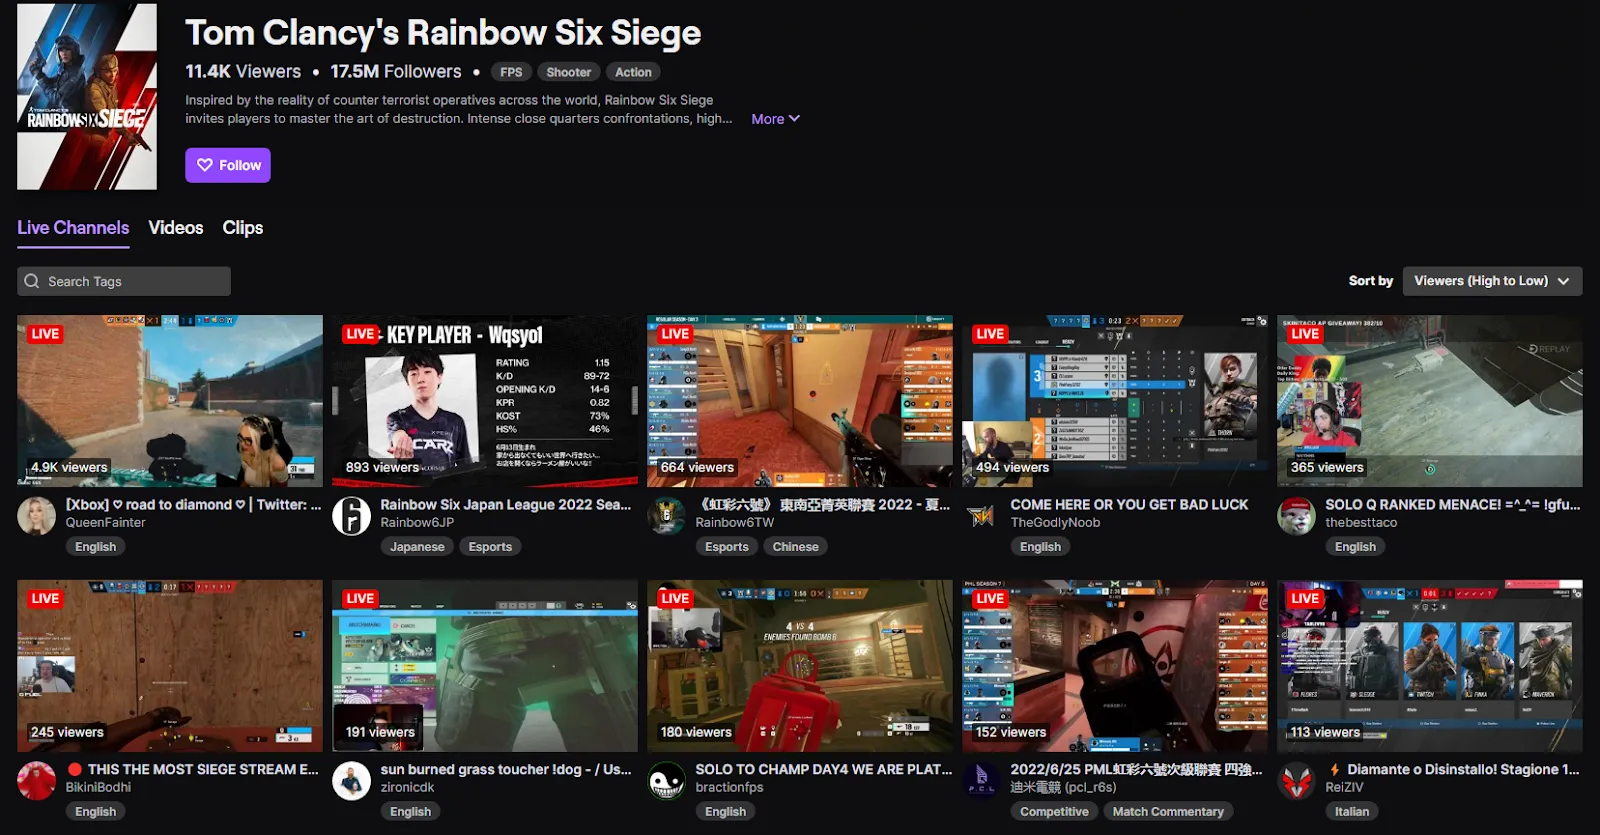 Compared to other similar titles, R6 siege has much less viewers.